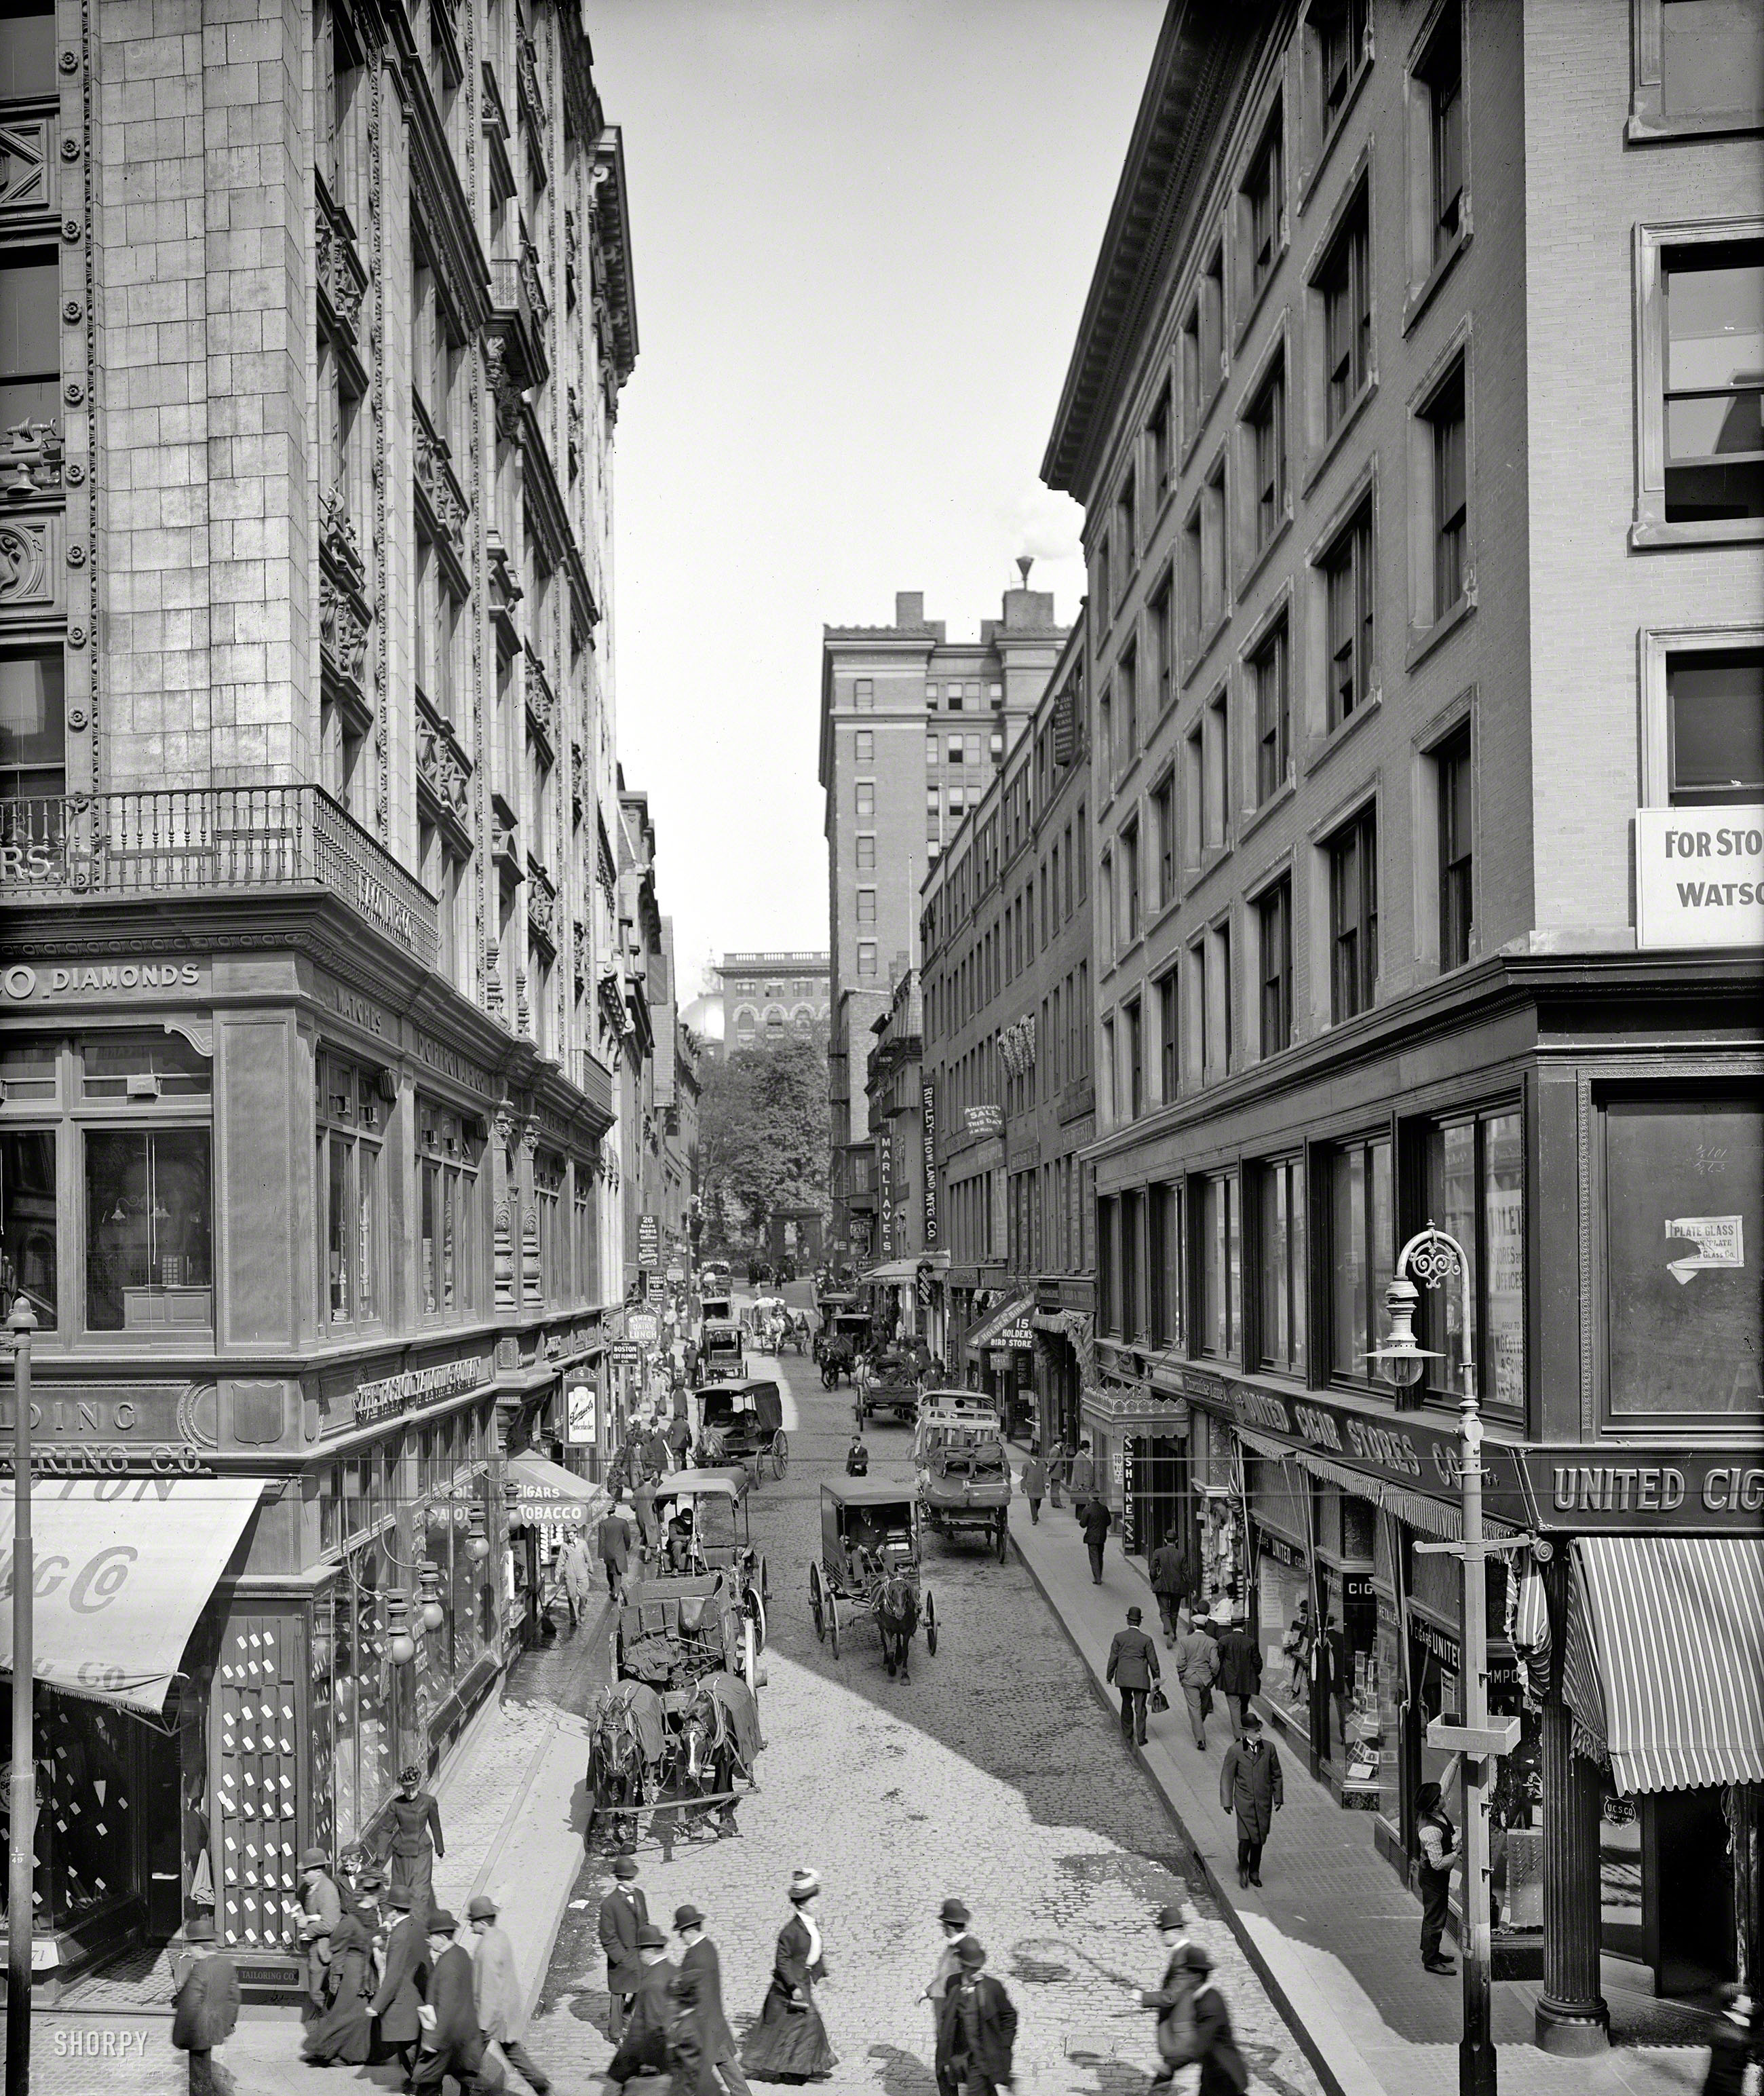 Bromfield Street in Boston circa 1908, home at No. 15 to Holden's Bird Store. 8x10 inch glass negative, Detroit Publishing Company. View full size.